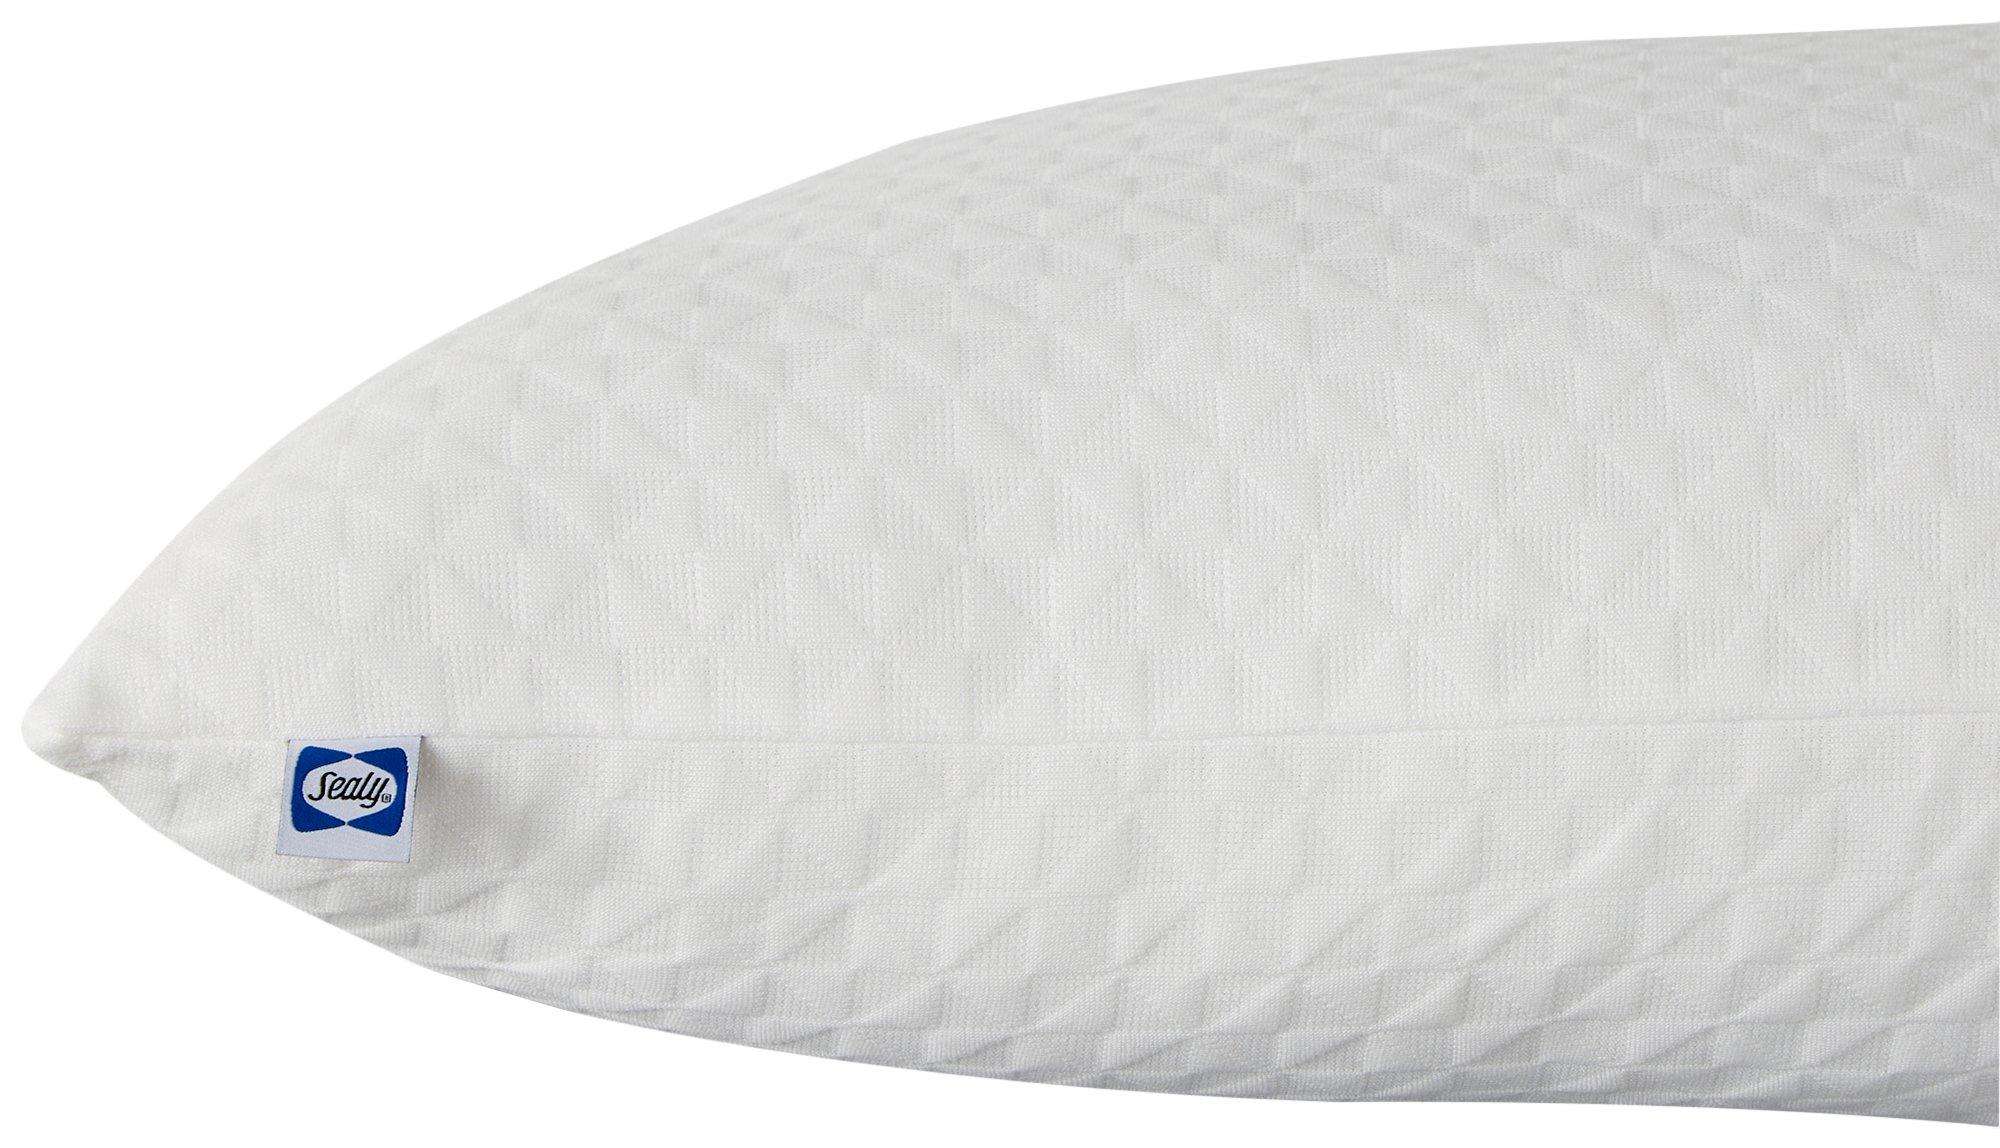 Sealy Spa Comfort King Bed Pillow